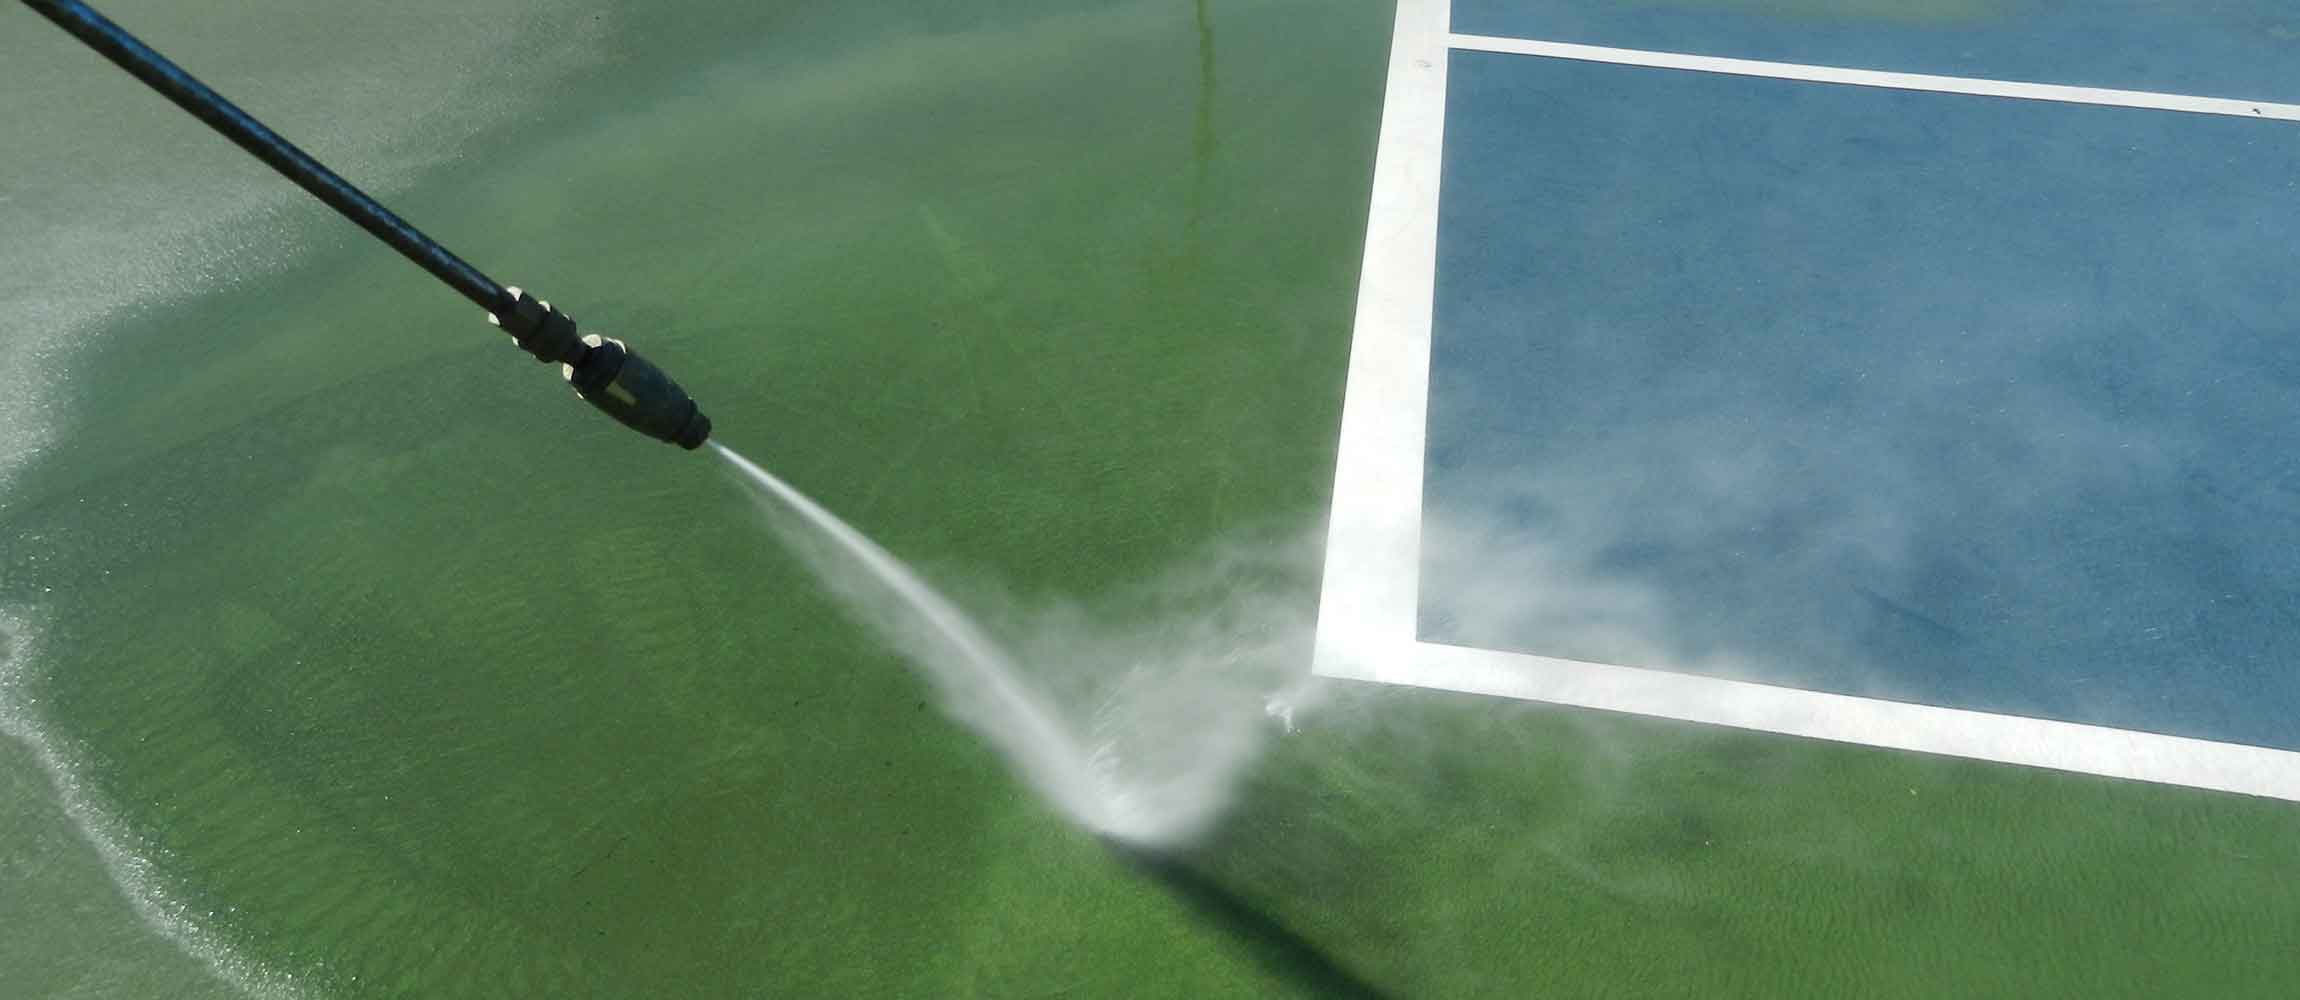 Master Systems Courts Tennis Court Cleaning And Maintenance Slide